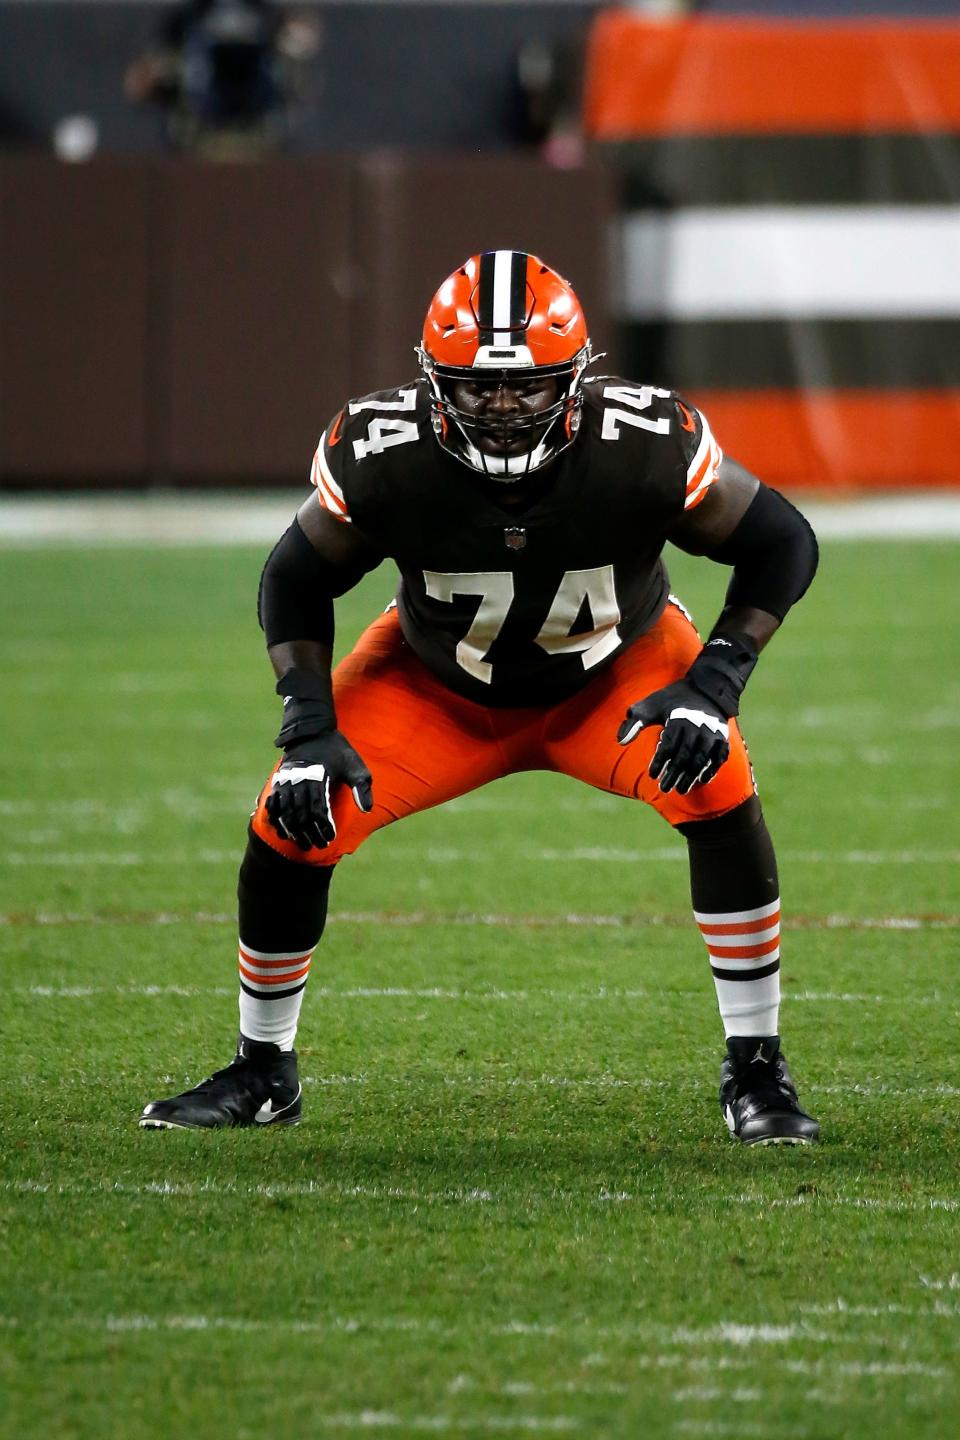 Browns offensive lineman Chris Hubbard hopes telling his story will help others cope with their mental health issues. [Kirk Irwin/Associated Press]